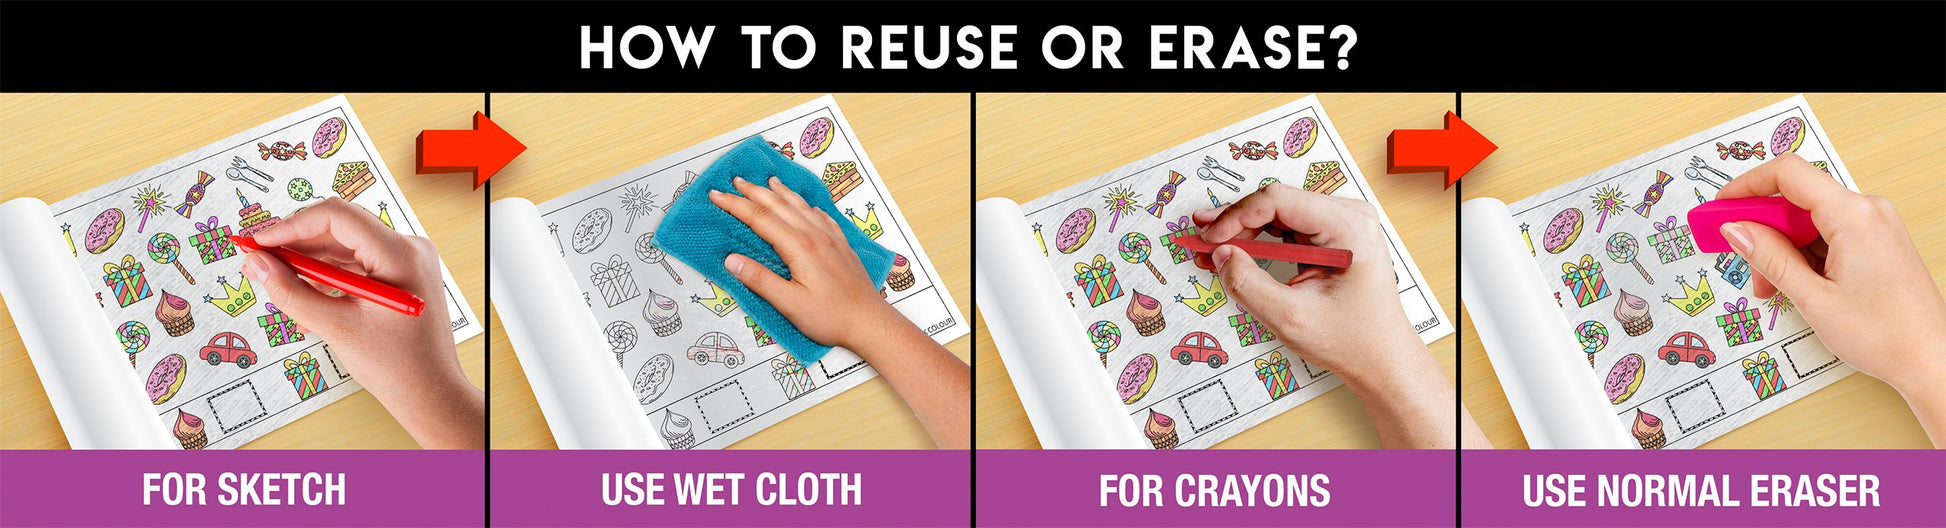 The image has a purple background with four pictures demonstrating how to reuse or erase: the first picture depicts sketching on the sheet, the second shows using a wet cloth to remove sketches, the third image displays crayons colouring on the sheet, and the fourth image illustrates erasing crayons with a regular eraser.